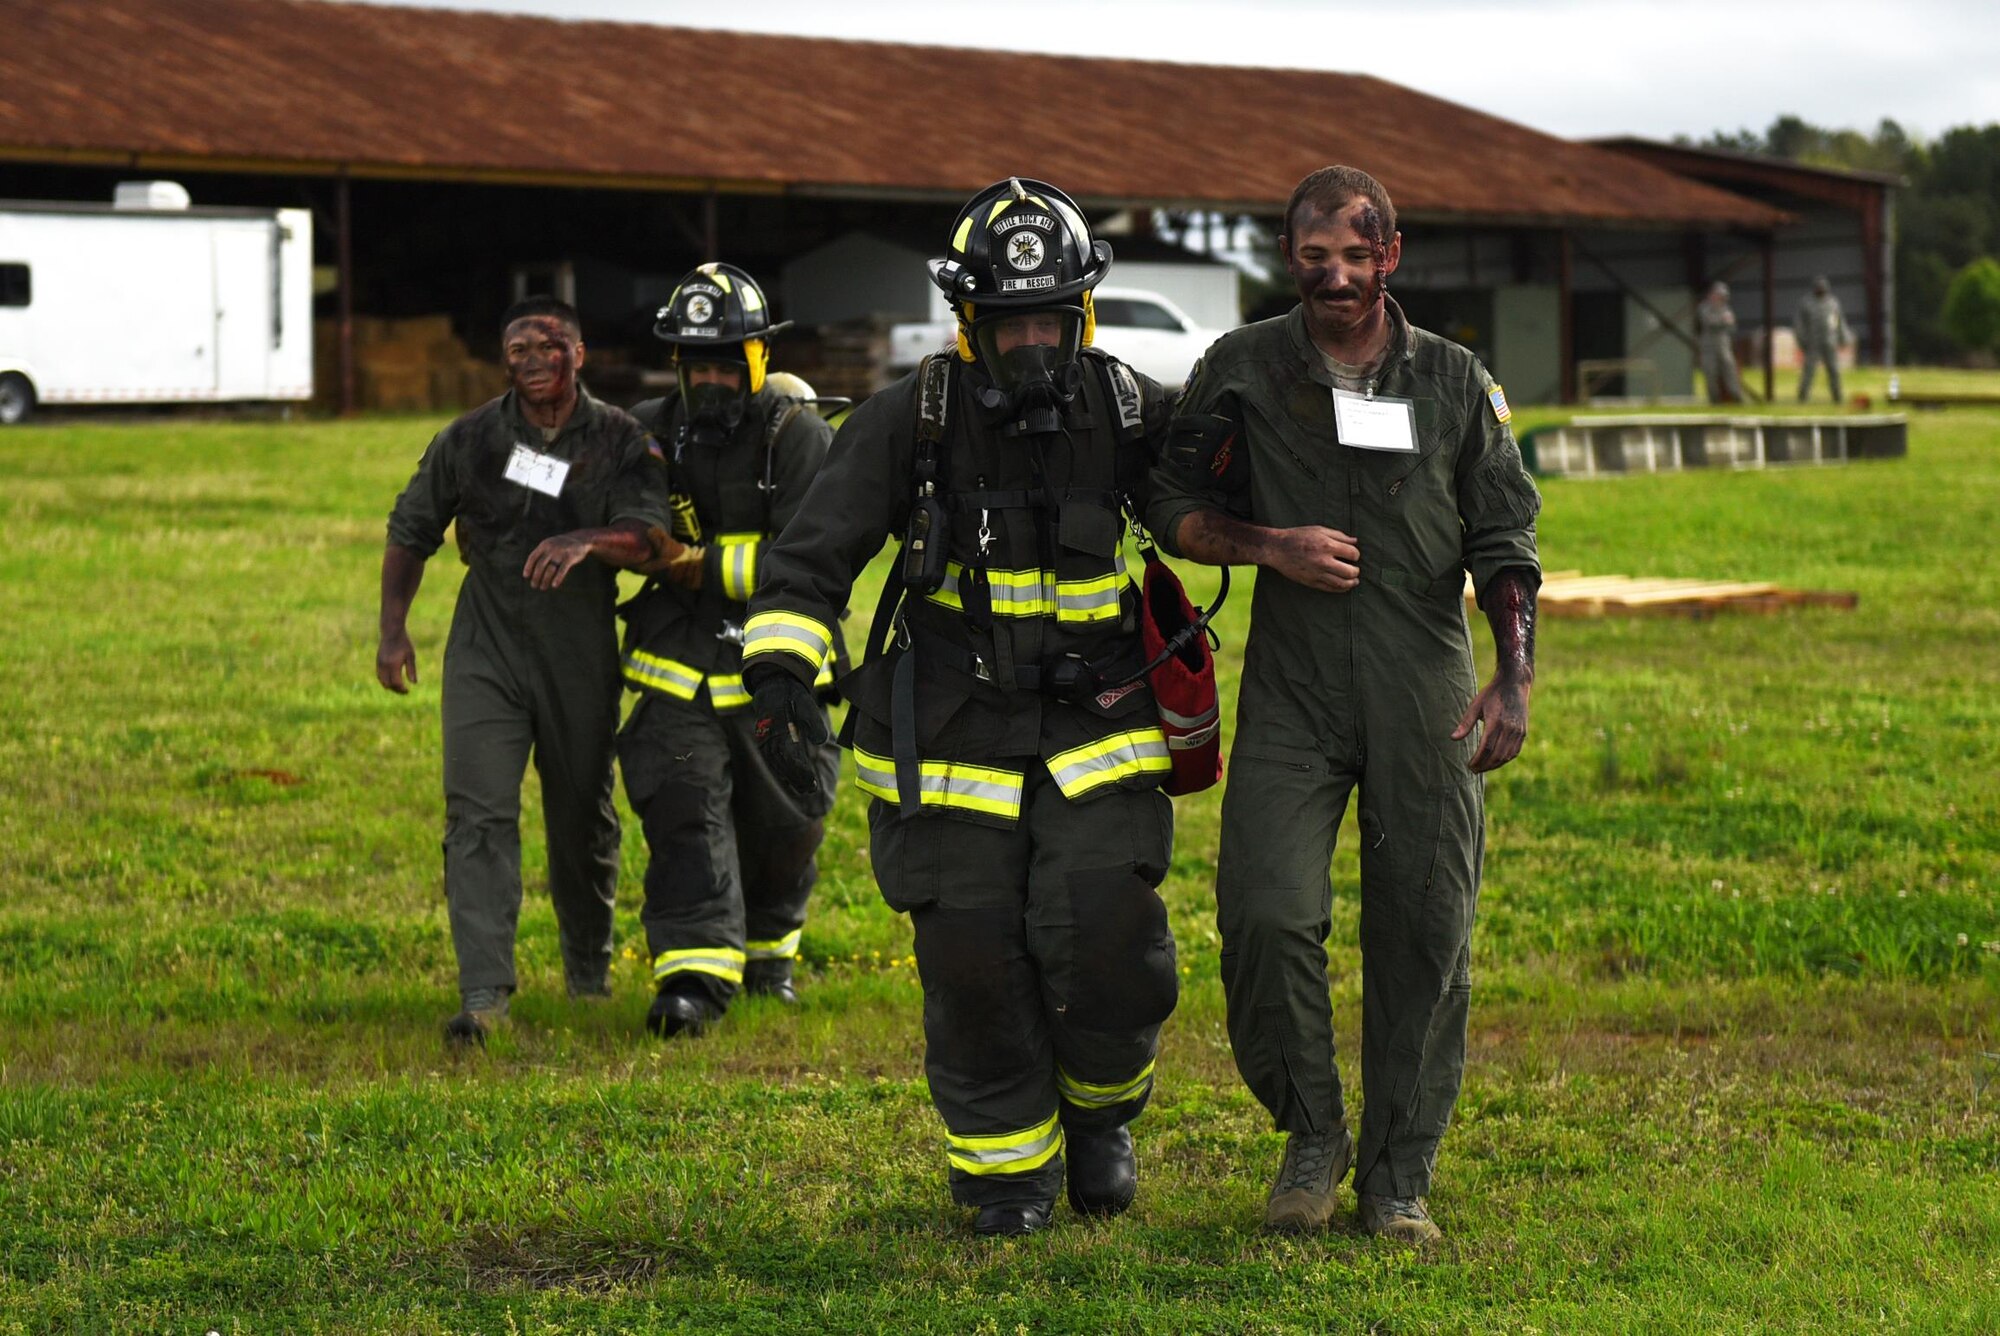 U.S. Air Force Senior Airman Lance Hendricks and U.S. Air Force Michael Leger, 19th Civil Engineer Squadron Fire Department firefighters, escort simulated crash victims to safety during a major accident response inspection March 30, 2017, at the Jacksonville Fire Department Training Center, Ark. Aircraft parts and simulated flare shells were arranged to replicate debris. (U.S. Air Force photo by Airman 1st Class Kevin Sommer Giron)